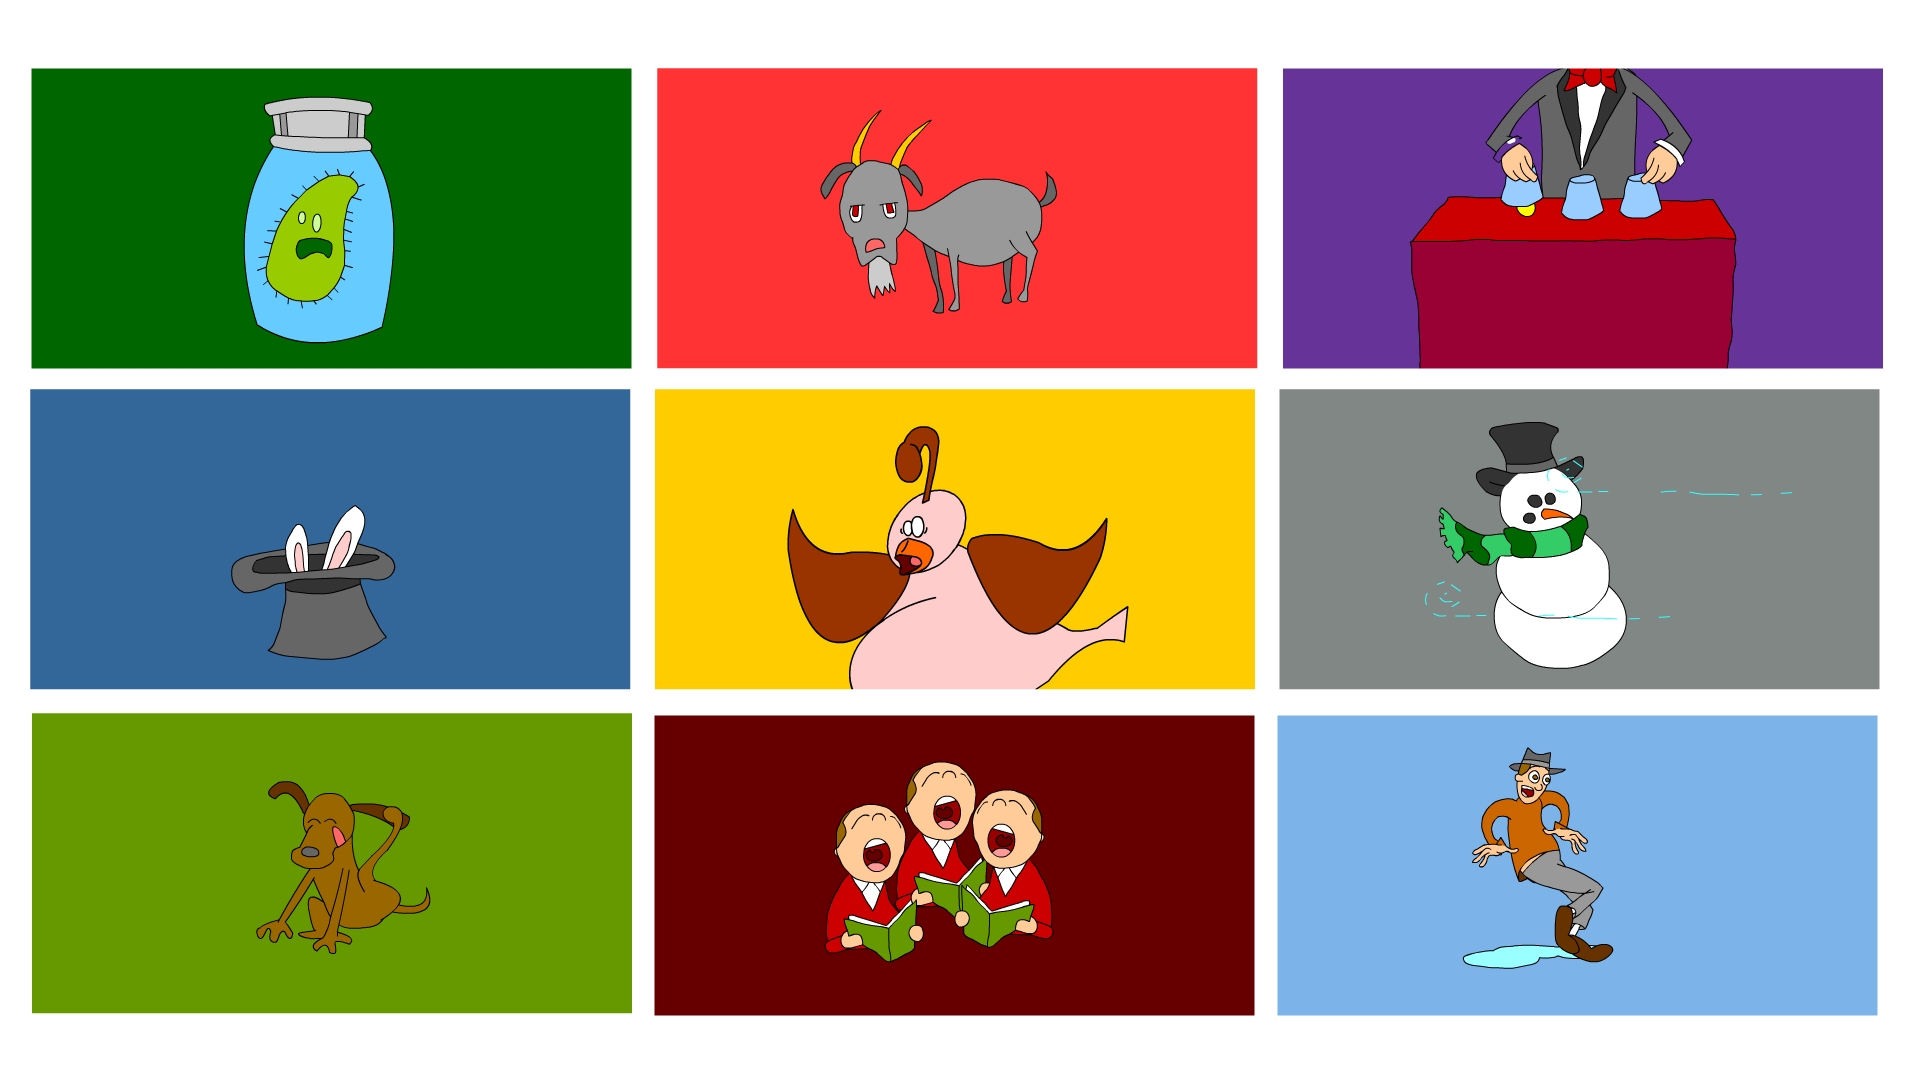 Producto Studios animated over 500 animated images including germs, goats, quails, choirs, dogs and magicians